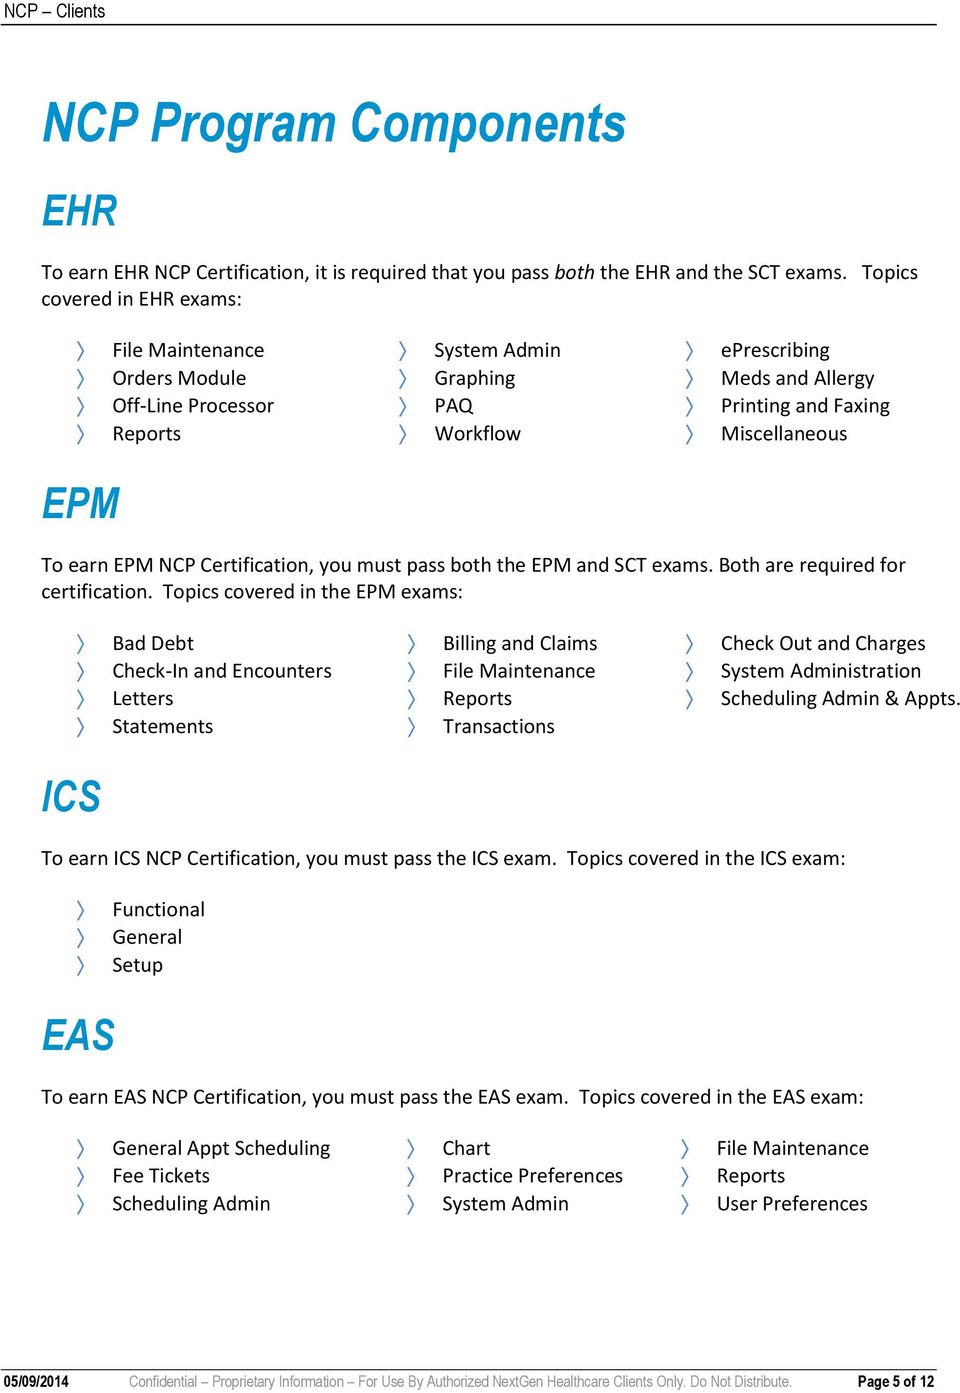 EPM NCP Certification, you must pass both the EPM and SCT exams. Both are required for certification.